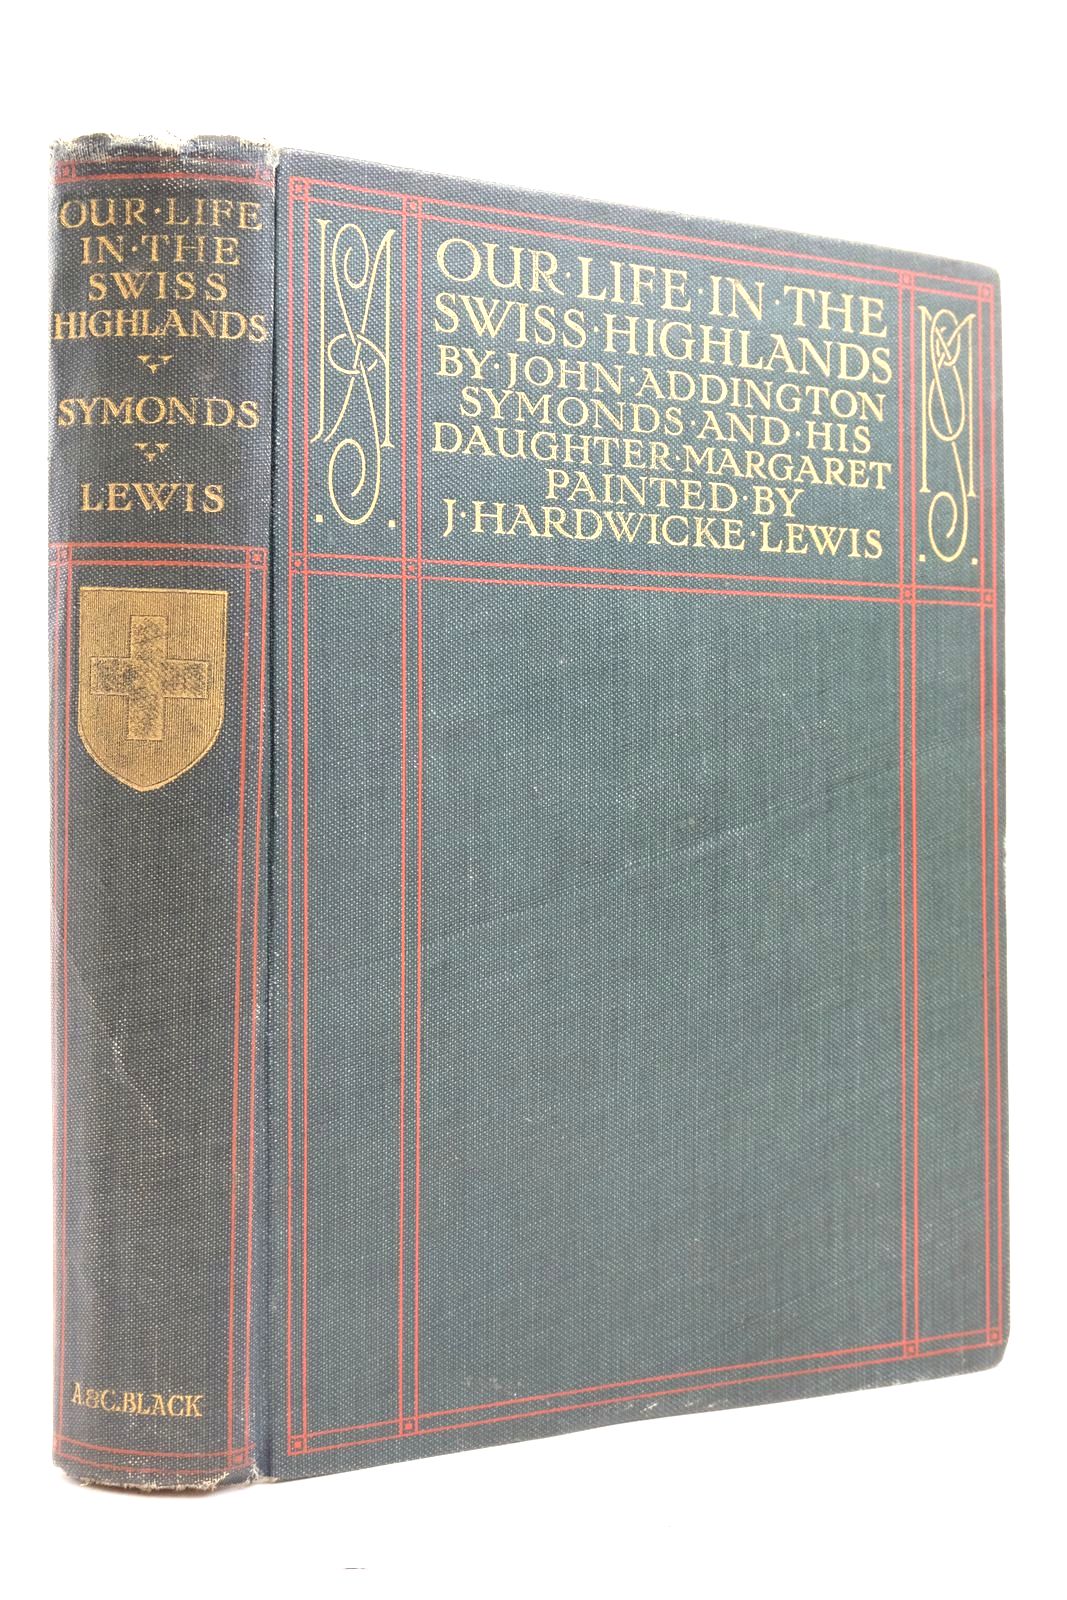 Photo of OUR LIFE IN THE SWISS HIGHLANDS written by Symonds, John Addington illustrated by Lewis, J. Hardwicke published by Adam &amp; Charles Black (STOCK CODE: 2137367)  for sale by Stella & Rose's Books